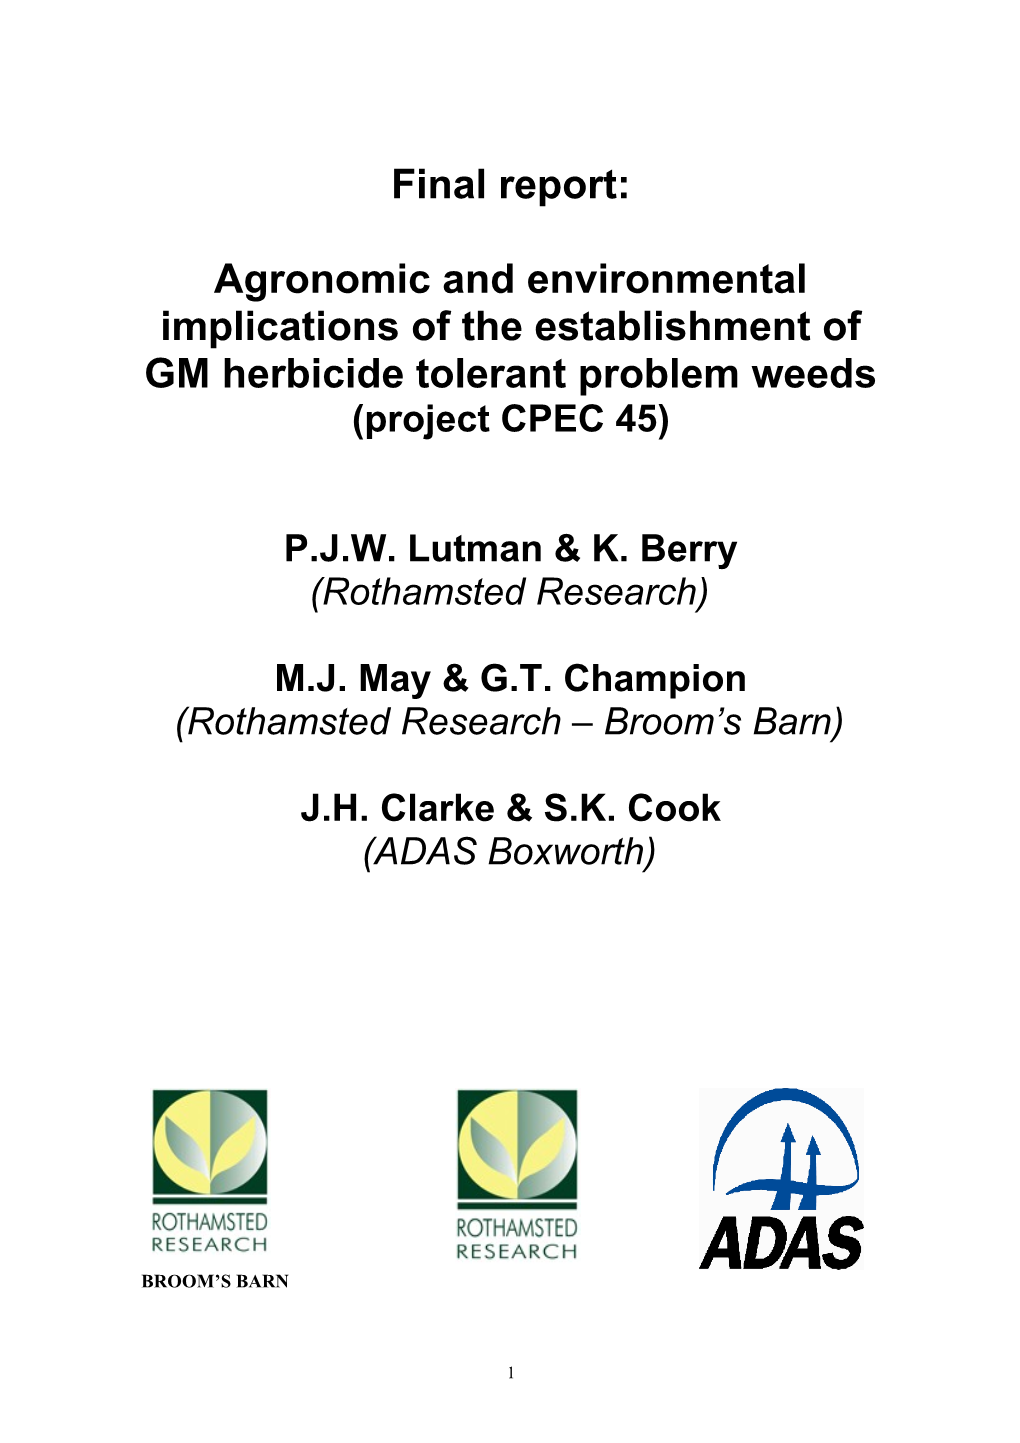 Agronomic and Environmental Implications of the Establishment of GM Herbicide Tolerant